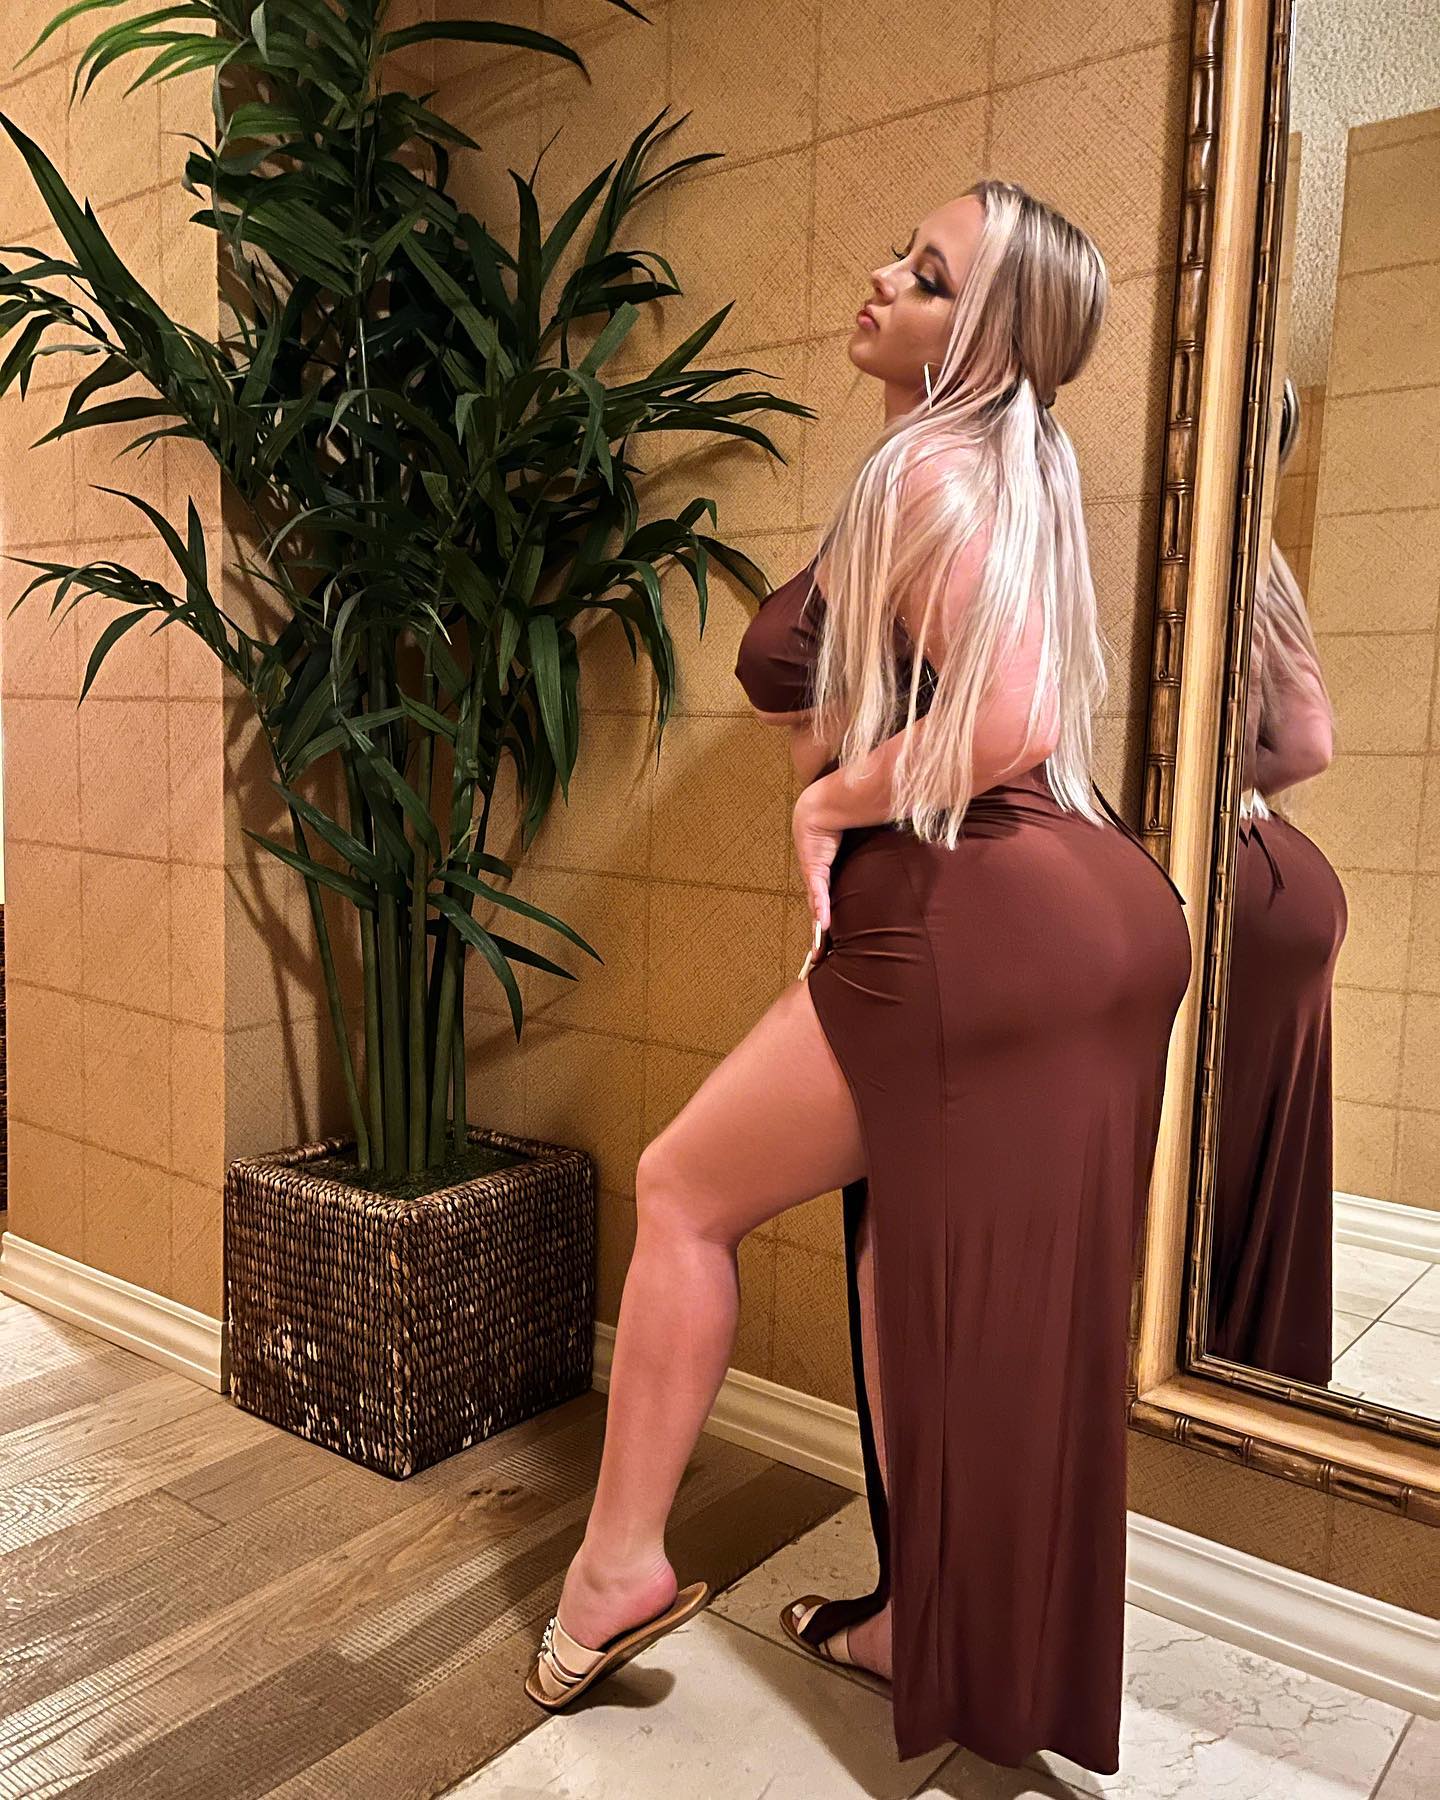 cheng pak nam recommends Big Booty Blonde Bbw